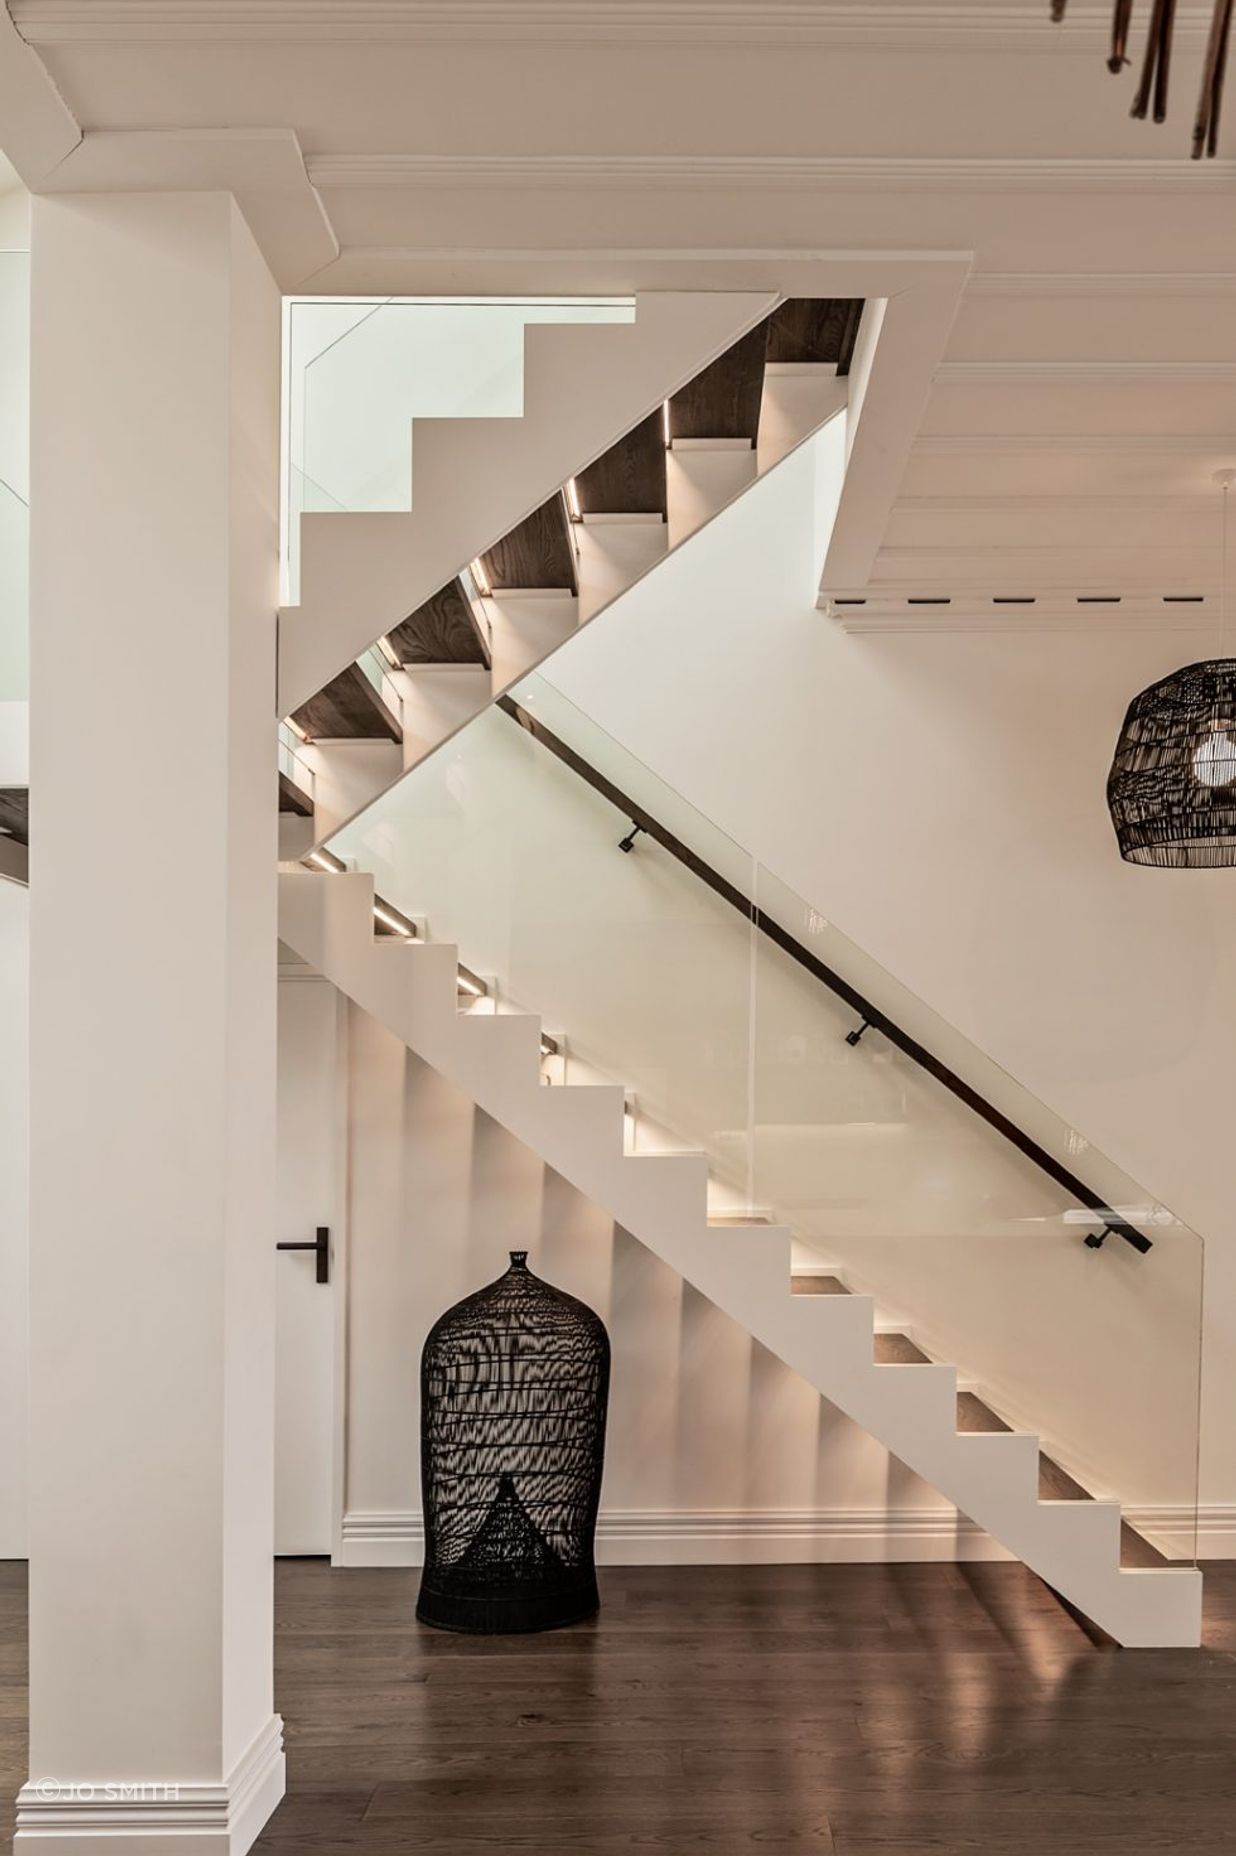 A modern staircase has dark oak treads to match the flooring and glass balustrades.